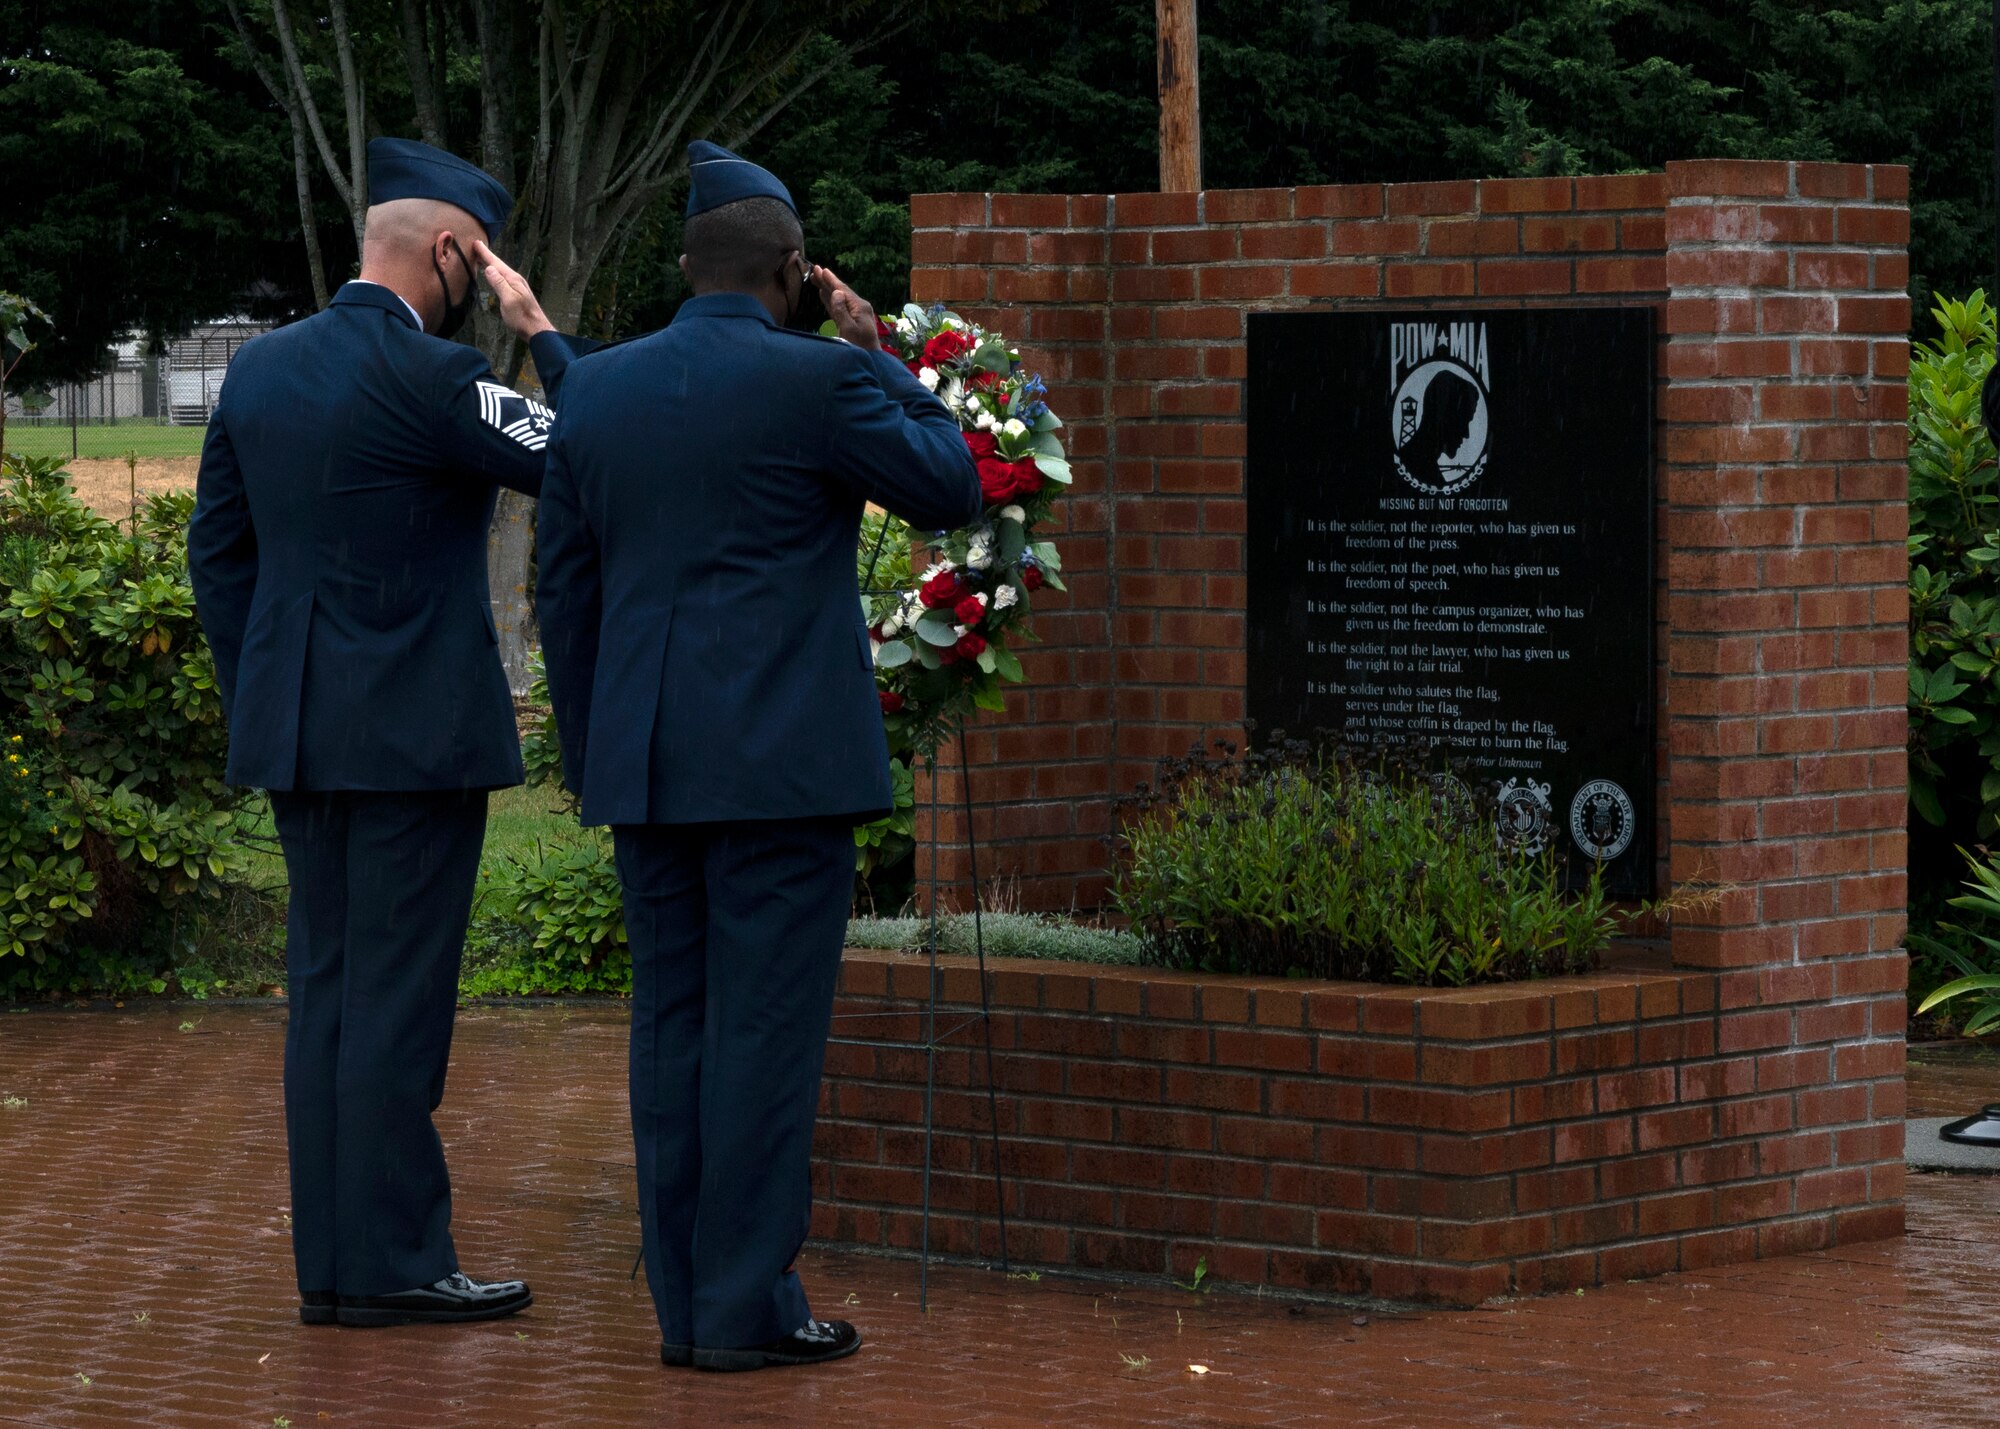 (From left) U.S. Air Force Chief Master Sgt. Christopher Clark, 627th Air Base Group superintendent, and Col. Christopher Hall, 627th ABG commander, render a salute after placing a wreath at the POW/MIA memorial at Joint Base Lewis-McChord, Washington, Sept. 17, 2021. Team McChord Airmen gathered at the McChord War Memorial for the wreath ceremony to pay their respects to the more than 81,000 American heroes who were, and may still be, missing in action and those who were prisoners of war. (U.S. Air Force photo by Senior Airman Zoe Thacker)